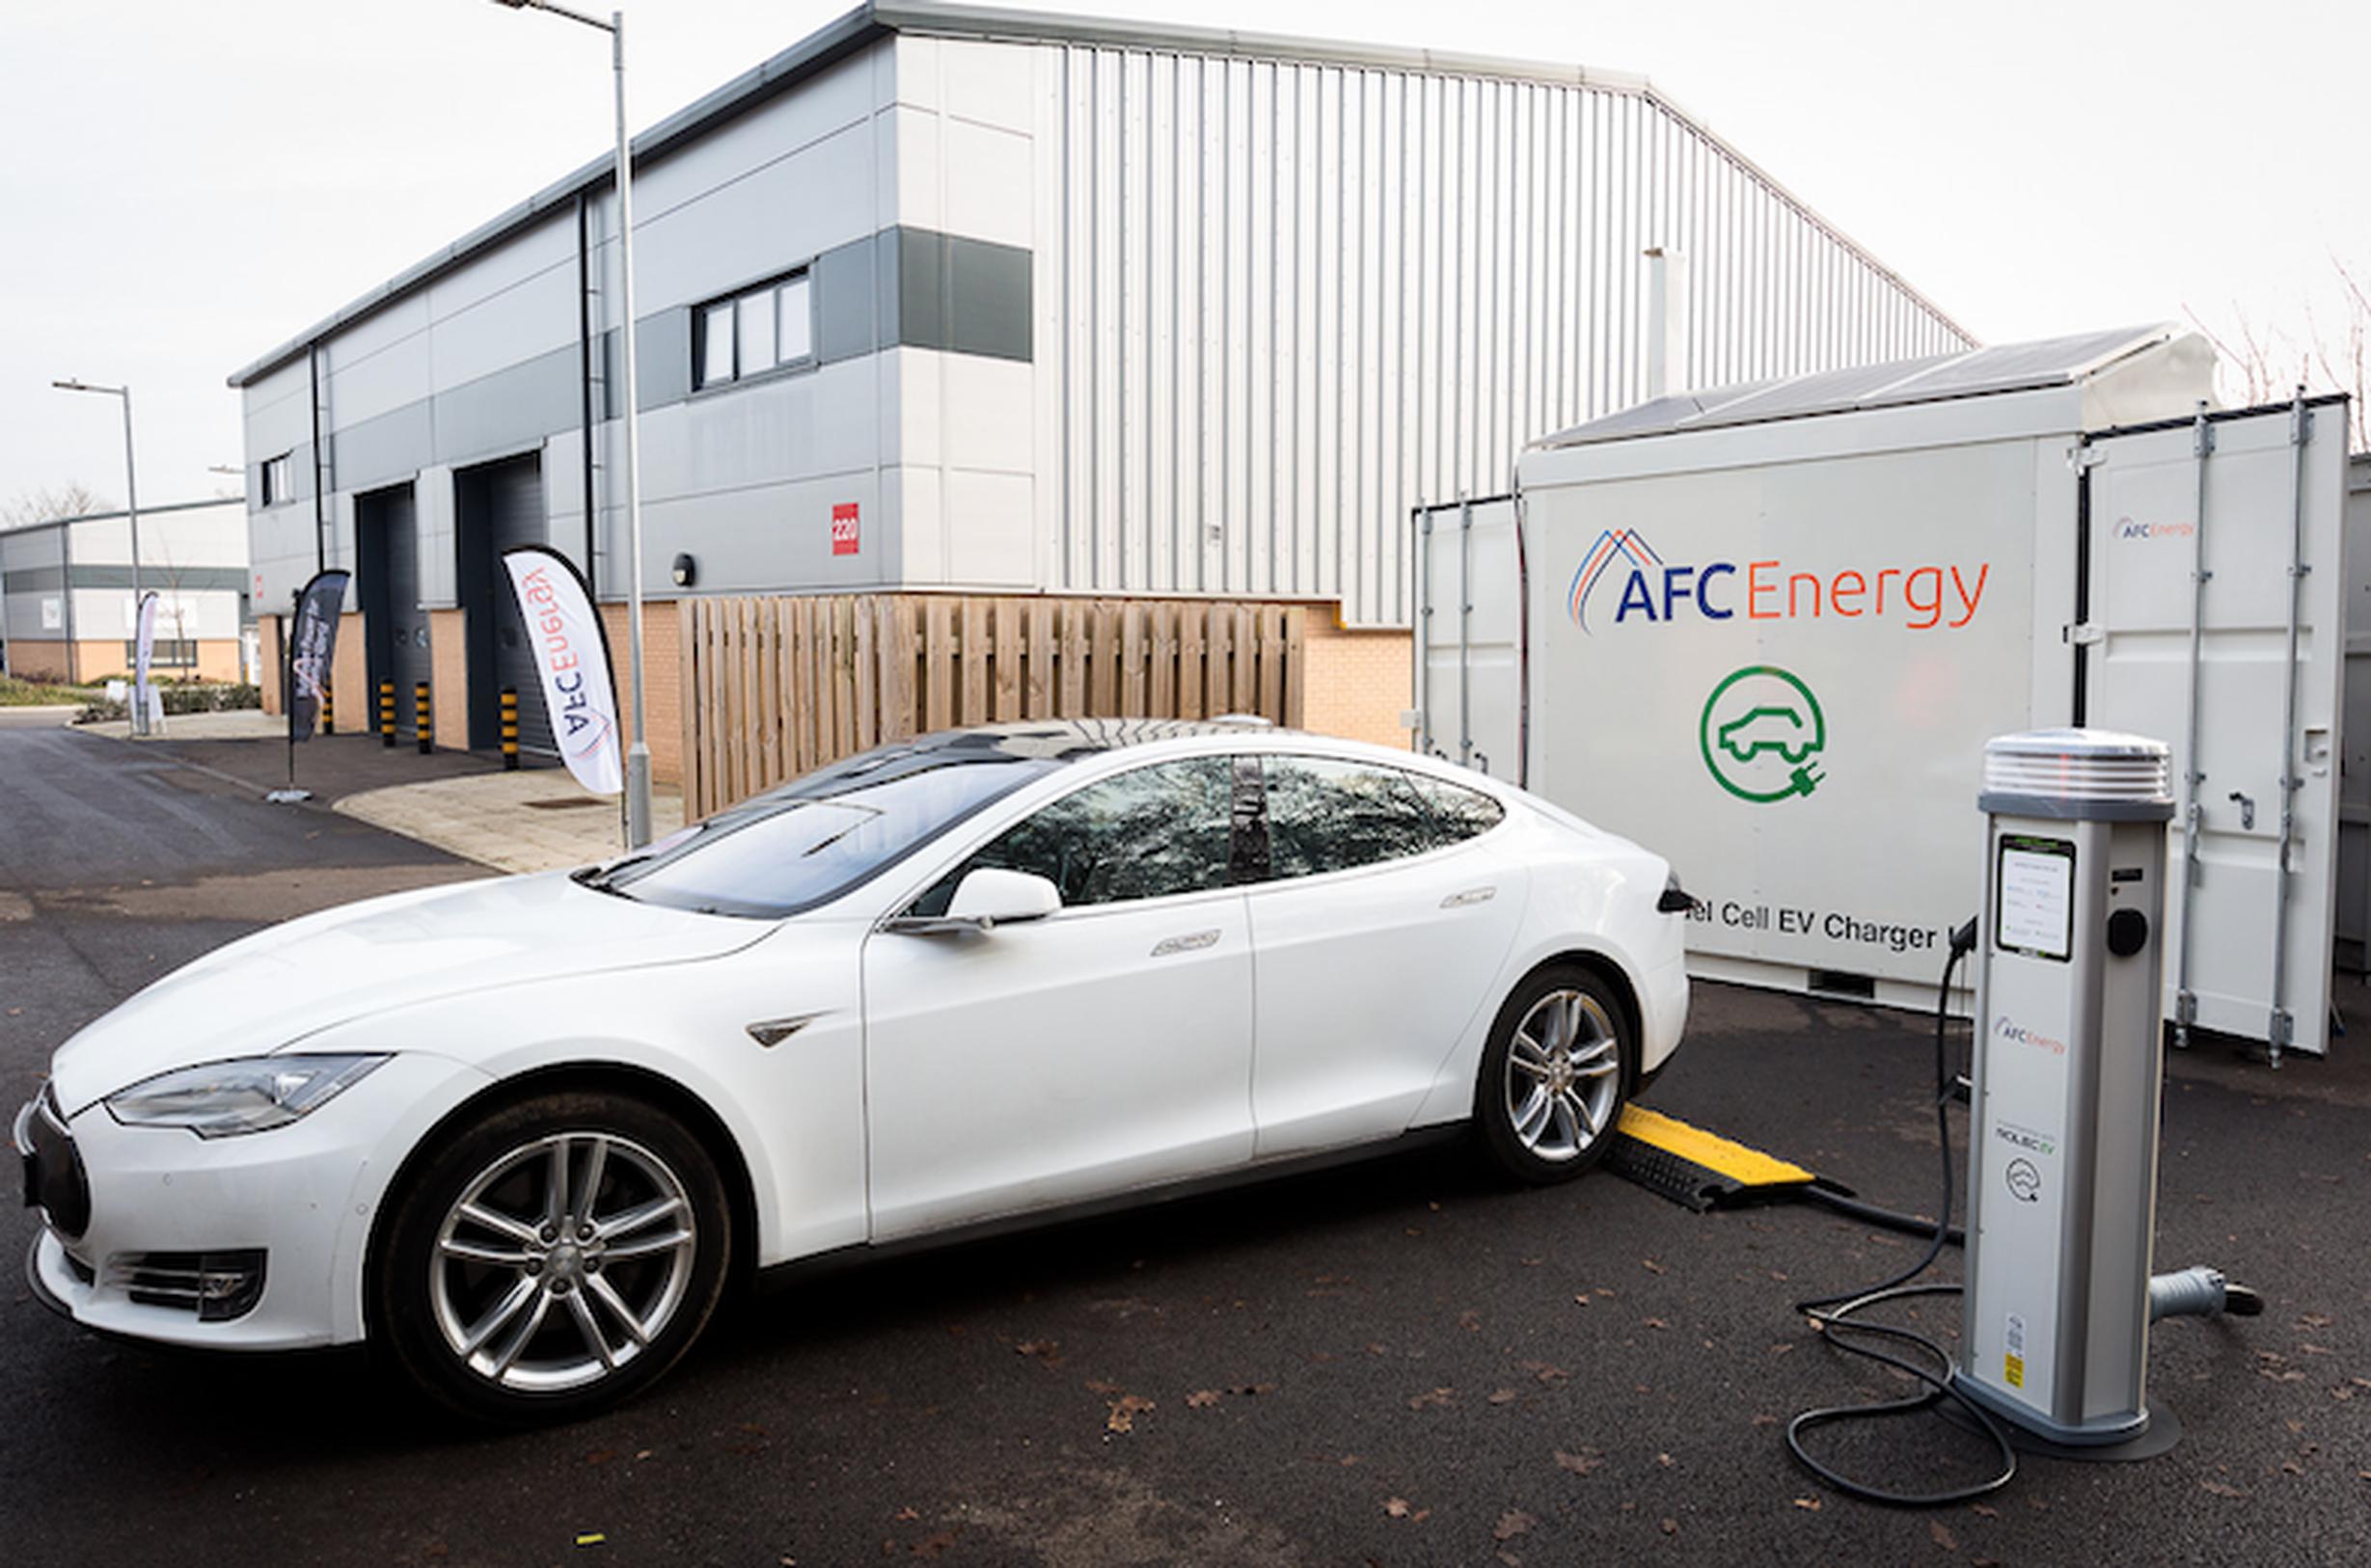 An AFC Energy charging unit